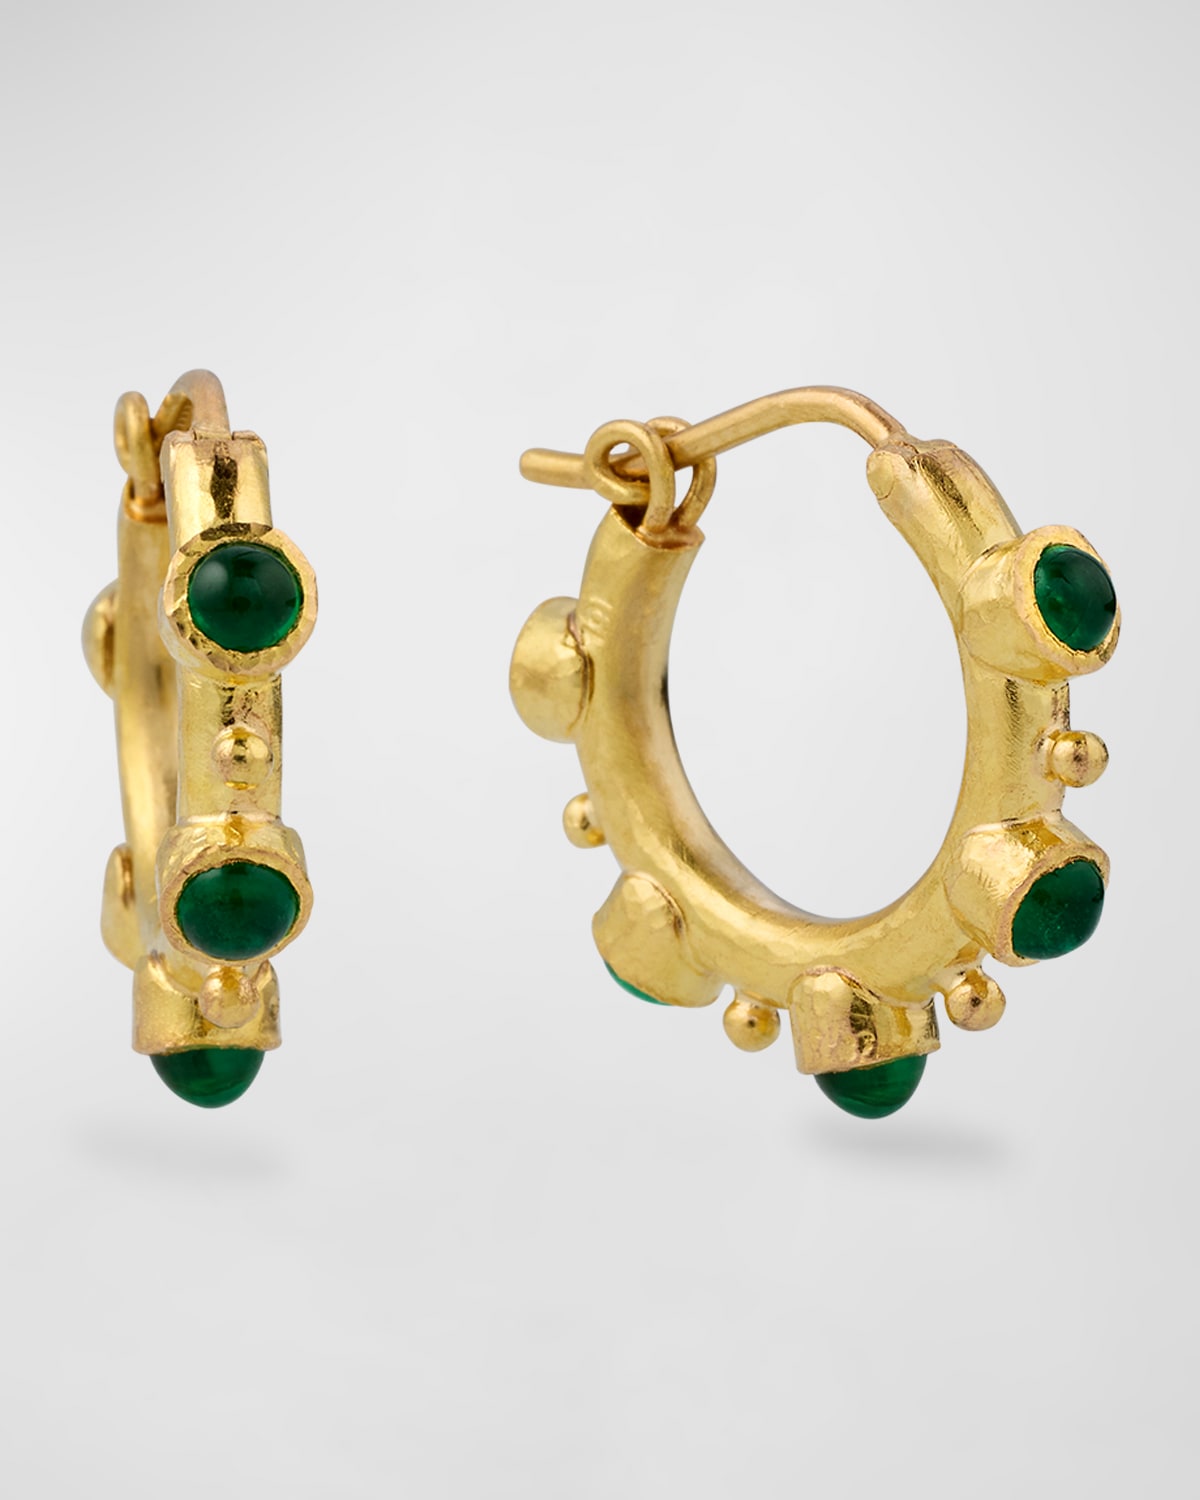 19K Yellow Gold Hoop Earrings with 3mm Cabochon Emeralds and Gold Dots